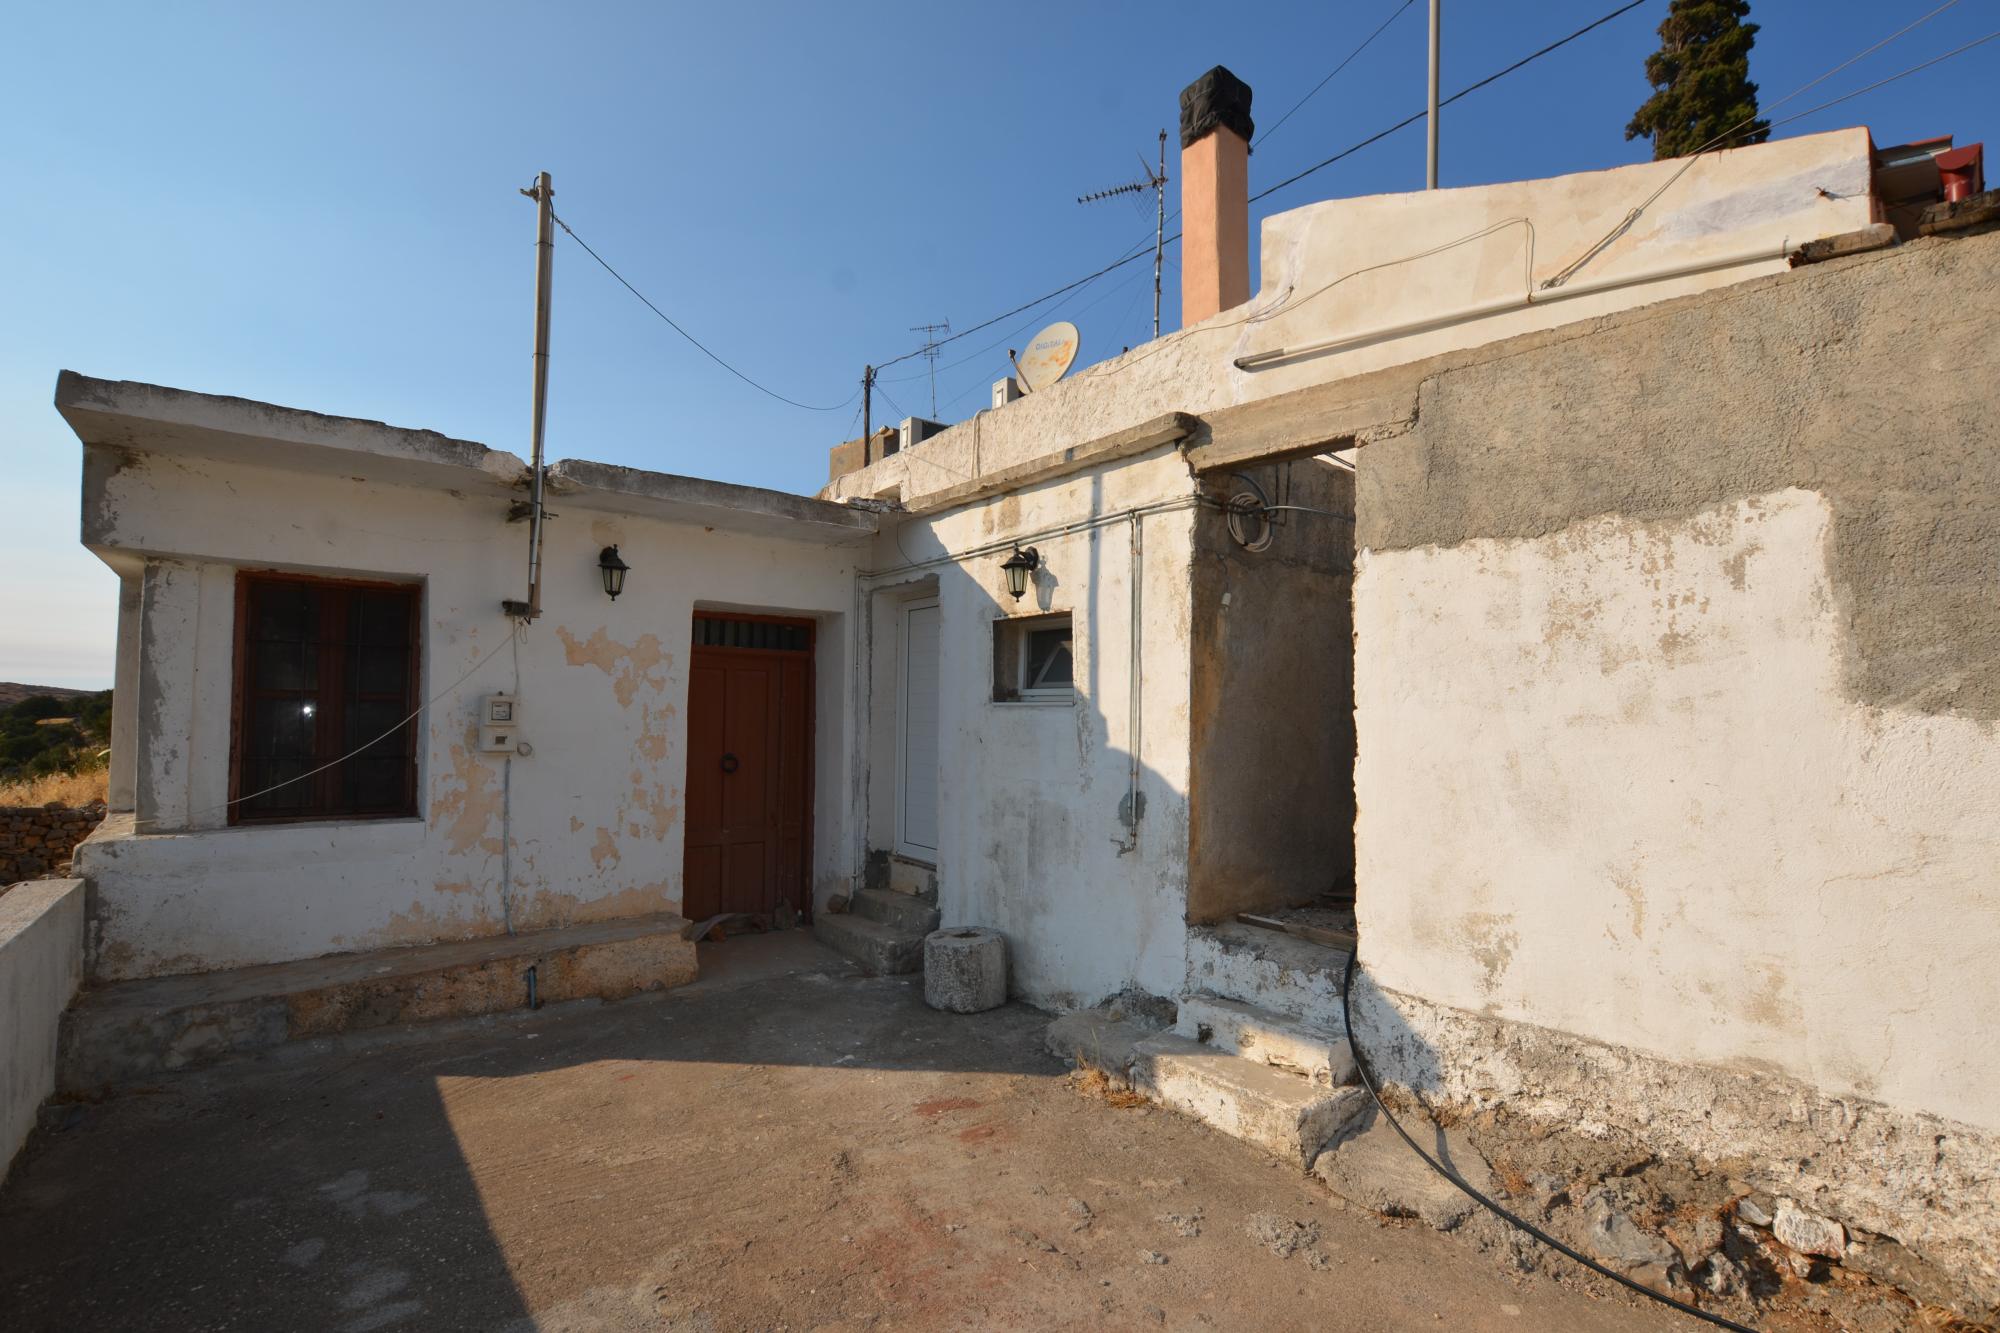 2 bedroom house in remote village with nice courtyard/terrace.